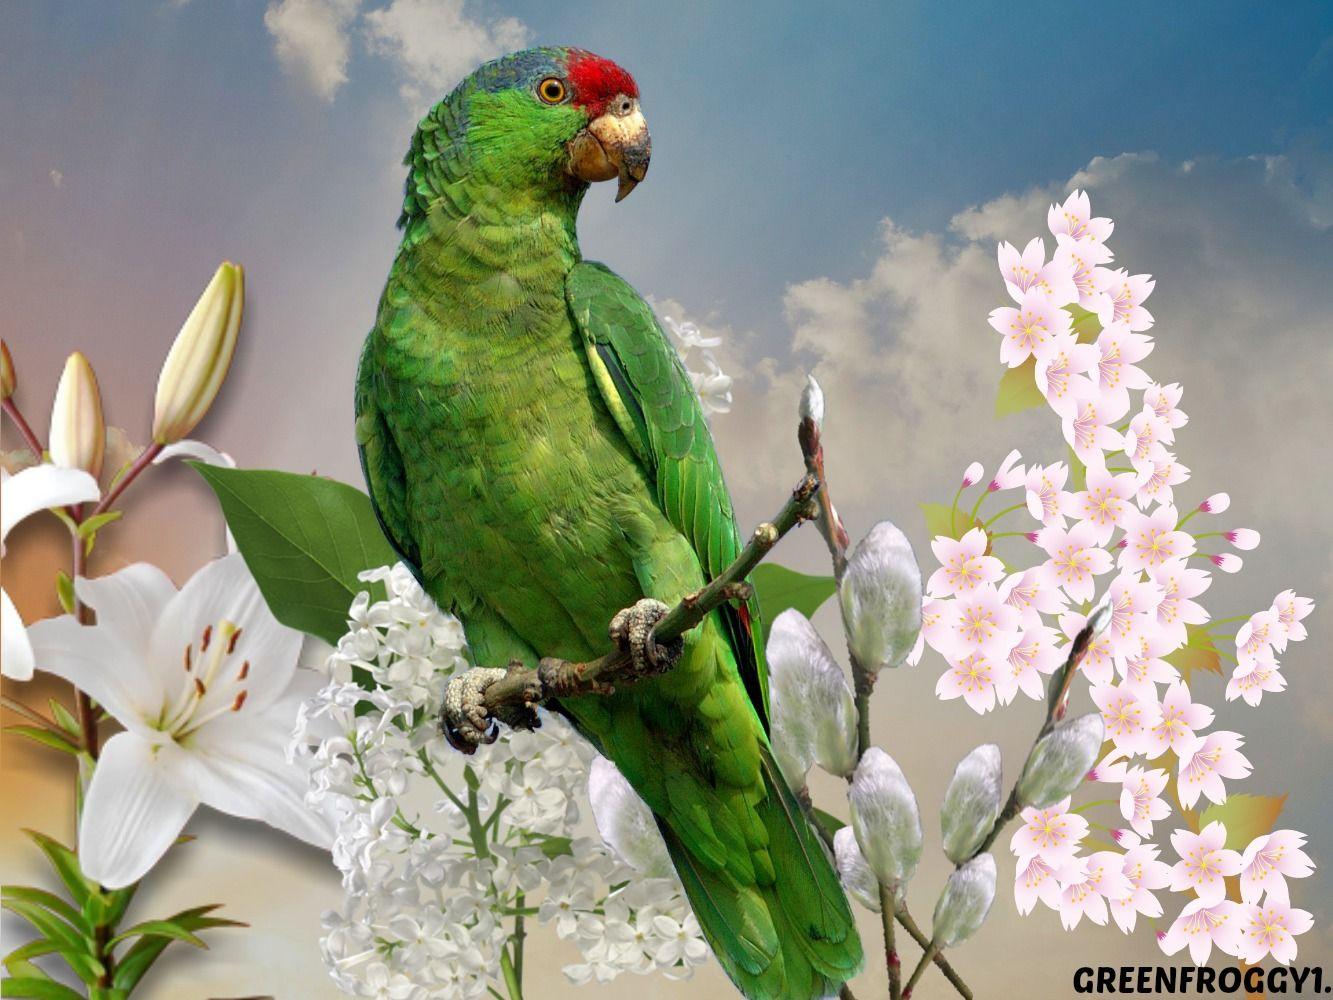 GREEN PARROT Wallpaper and Background Imagex1000